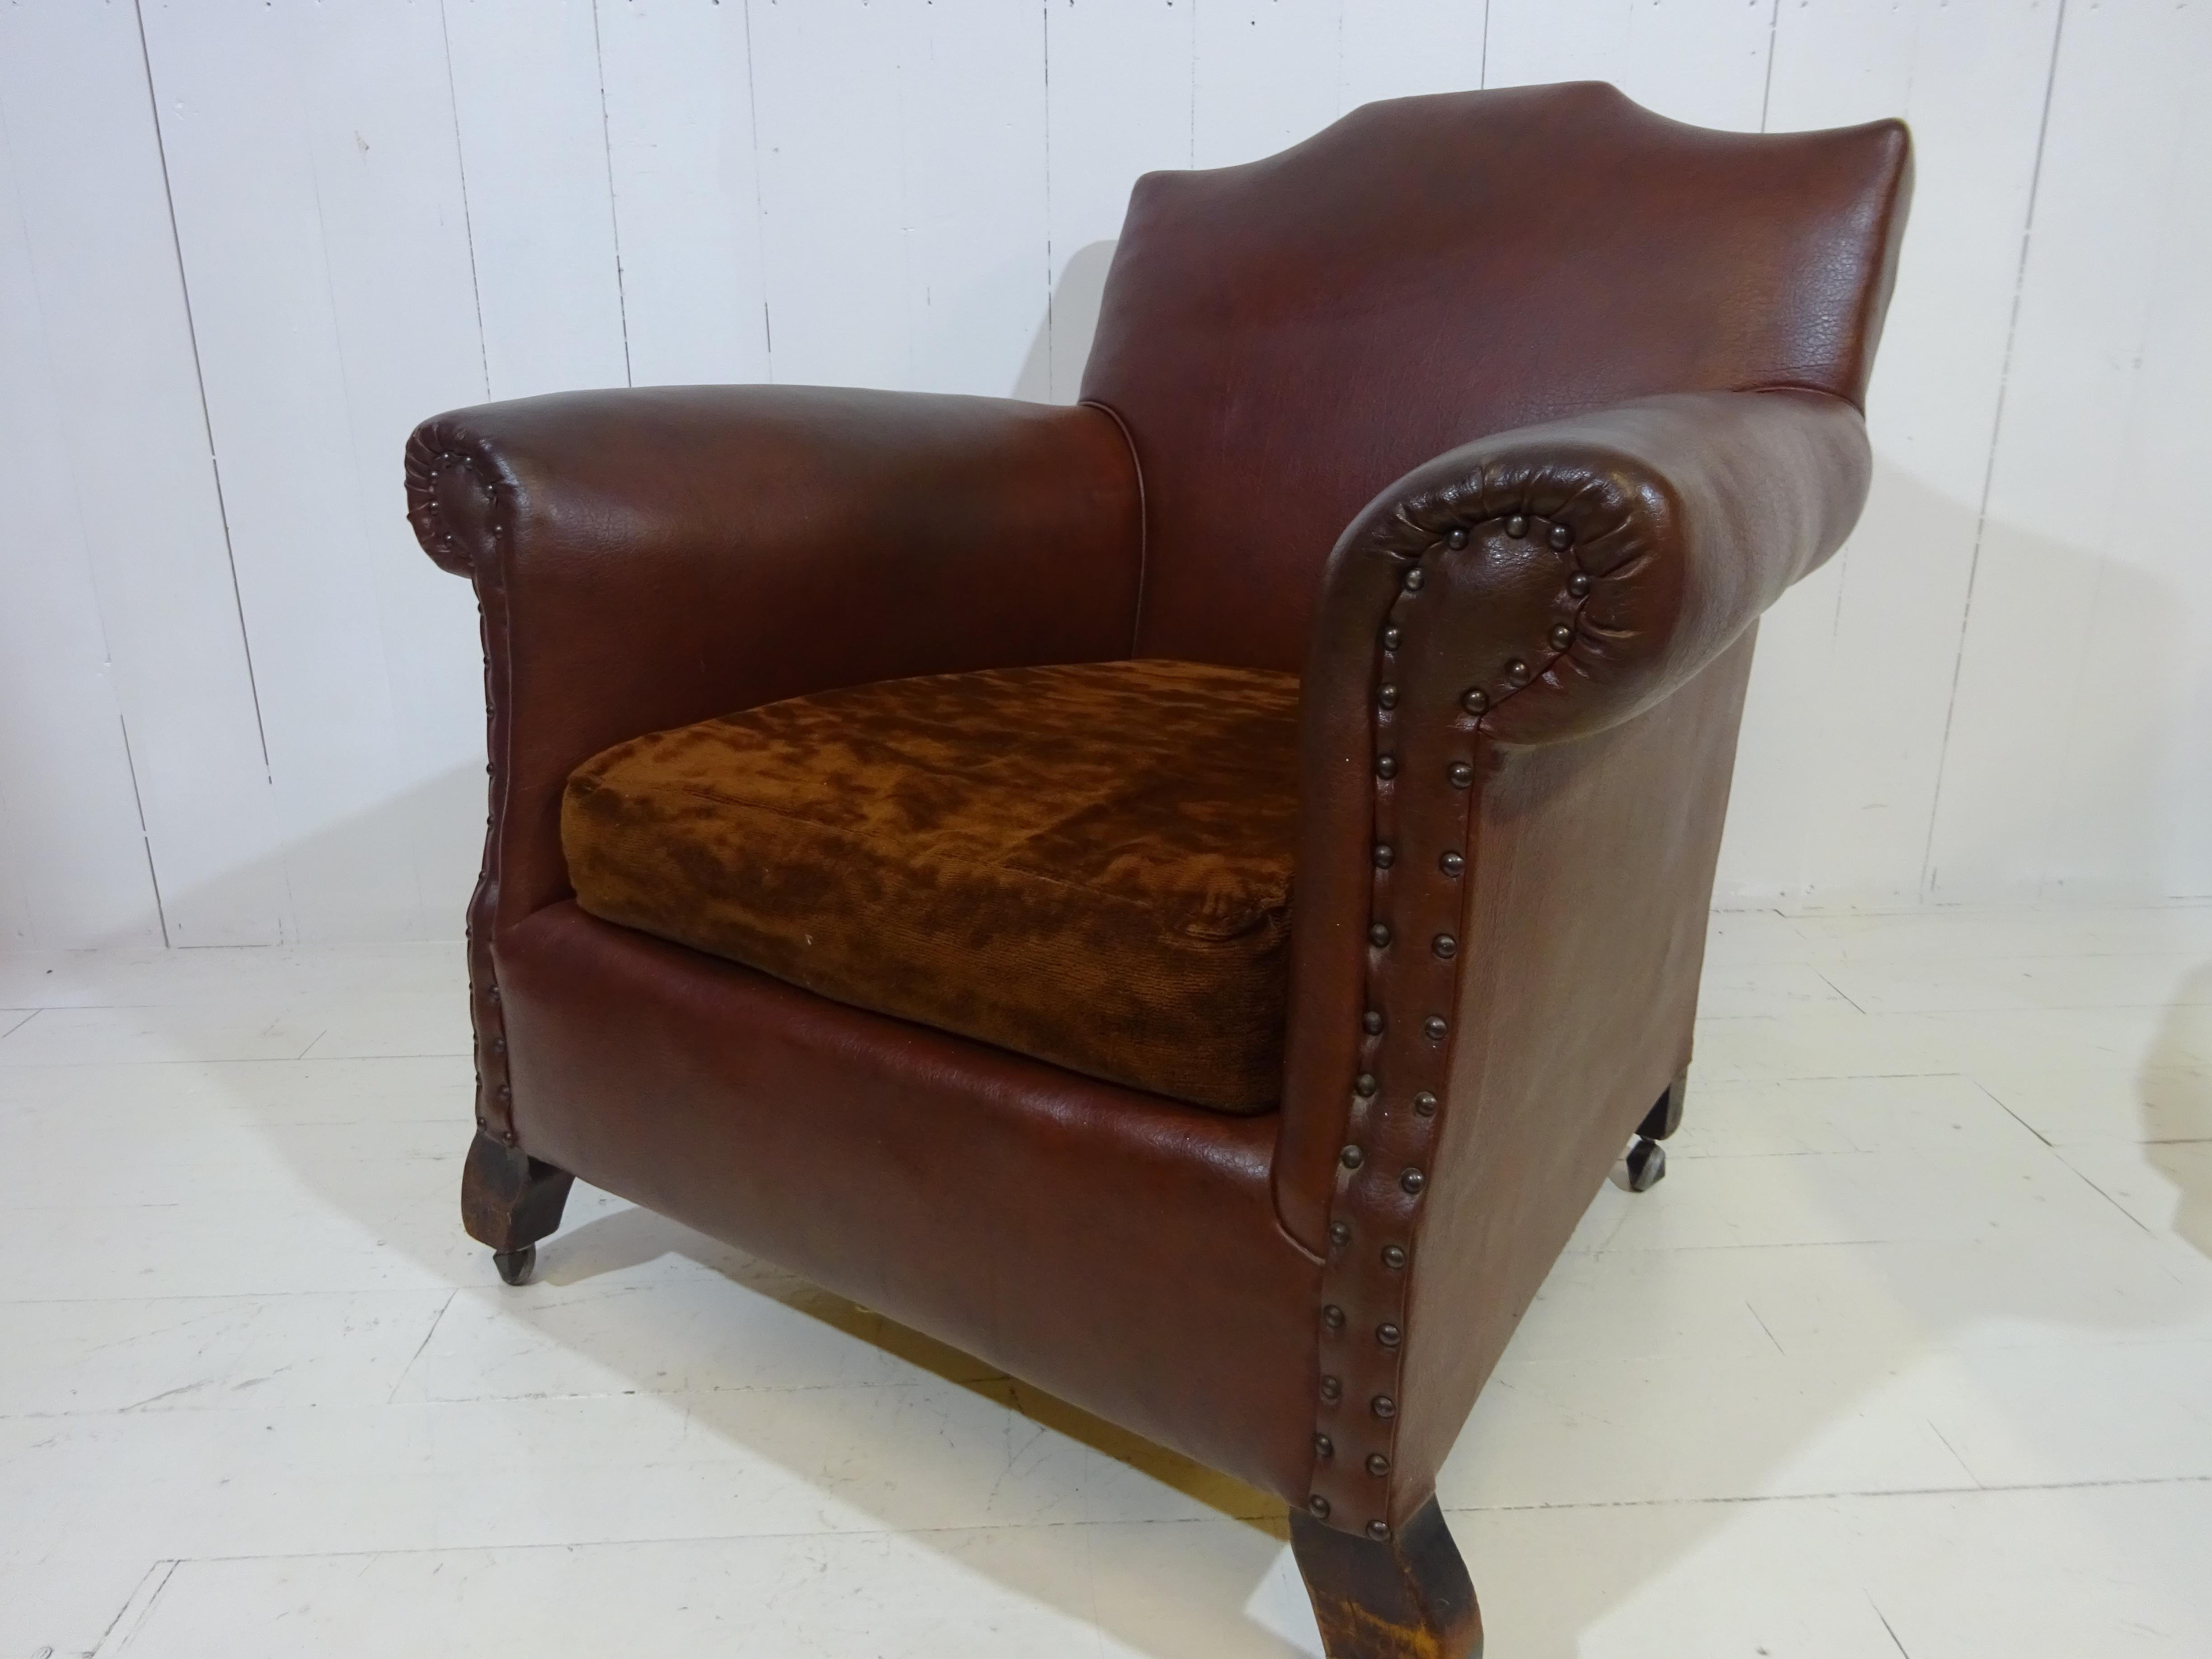 British Original 1920's Art Deco Club Chair in Brown Faux Leather